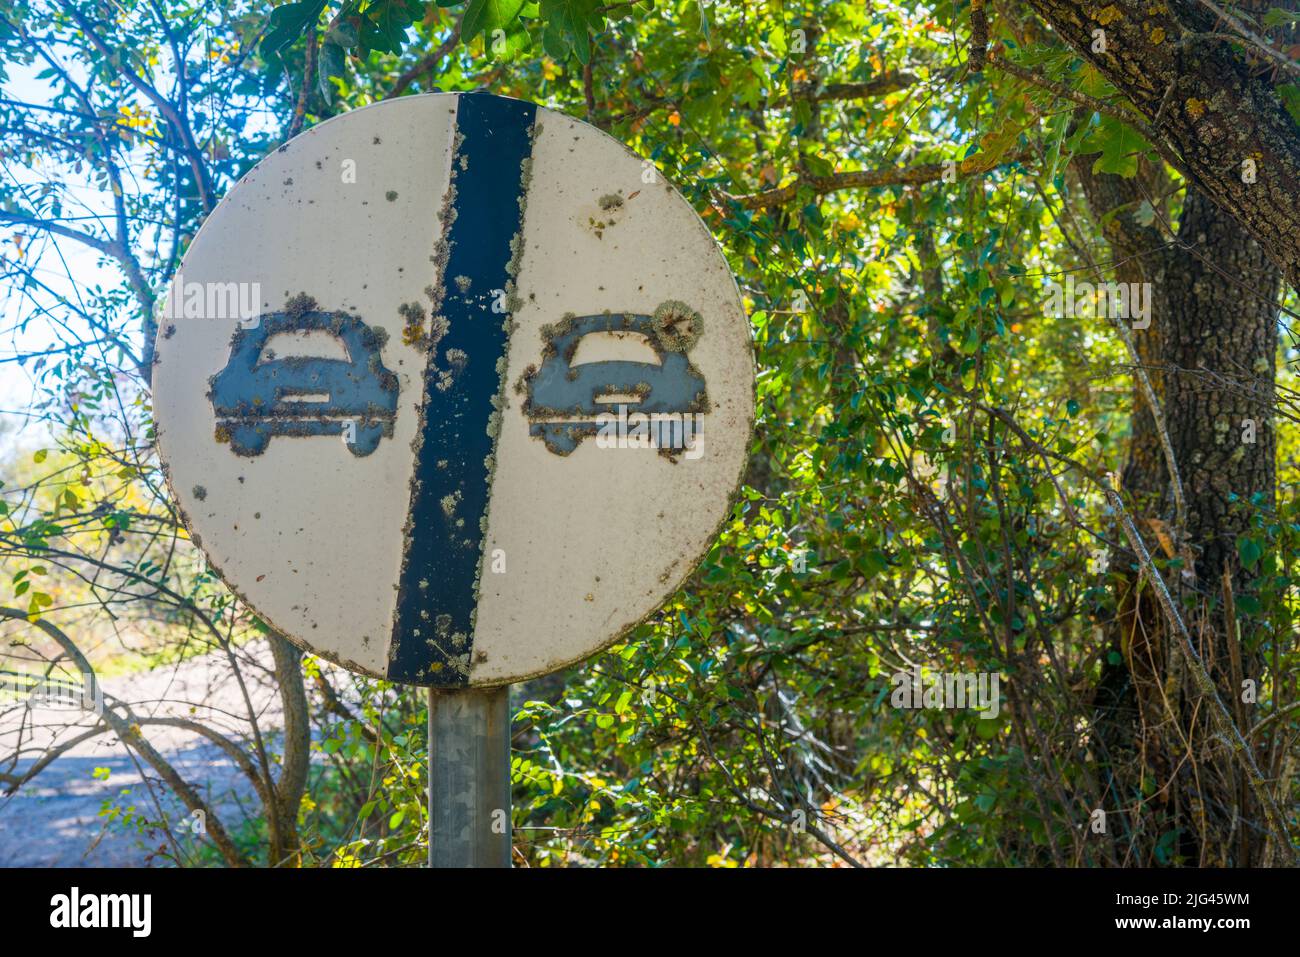 Old traffic signal: No overtaking. Piñuecar, Madrid province, Spain. Stock Photo